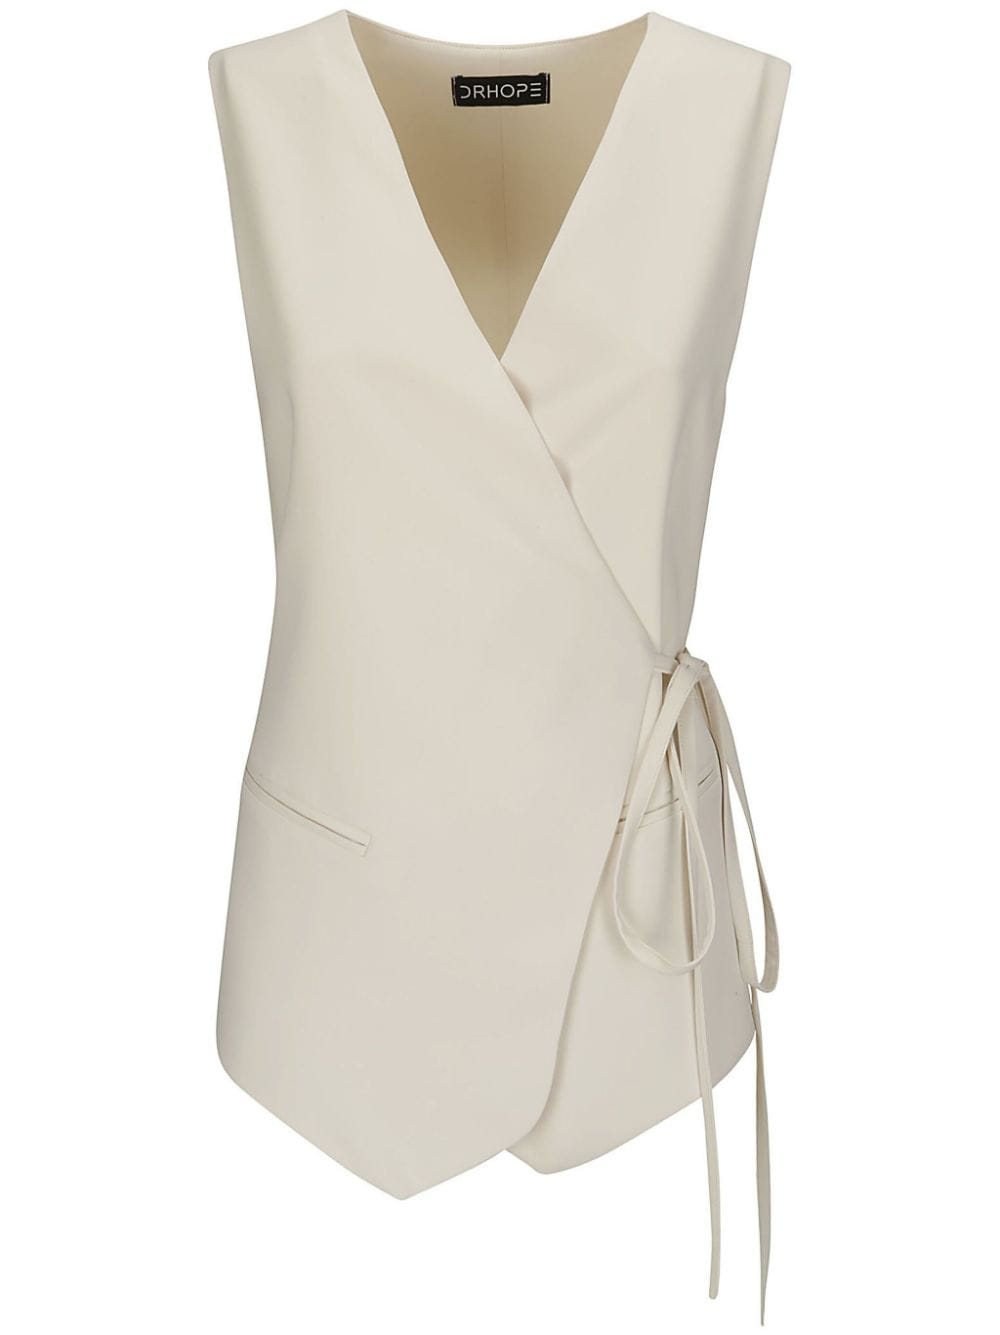 Drhope Sleeveless Tie-front Vest In White